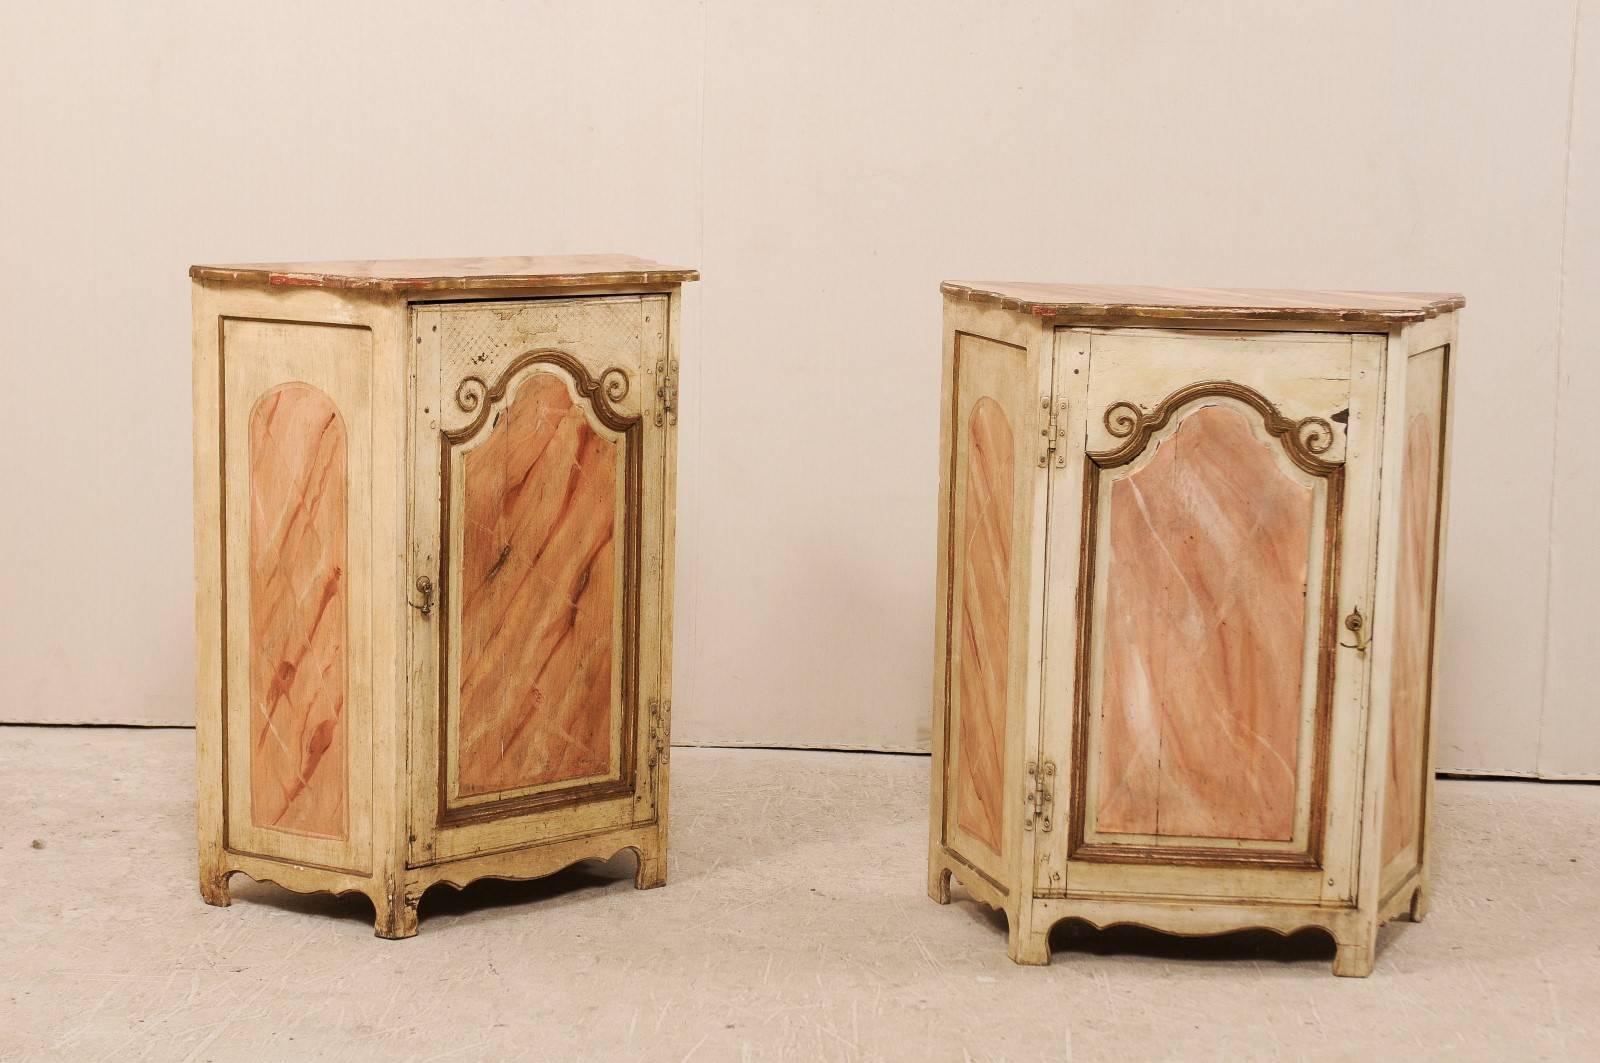 A pair of Italian early 20th century small painted wood commodini. These Italian chests each feature a single door with recess panel which has an arched top, flanked by two scrolls at either side. The top door panels and sides have all been painted